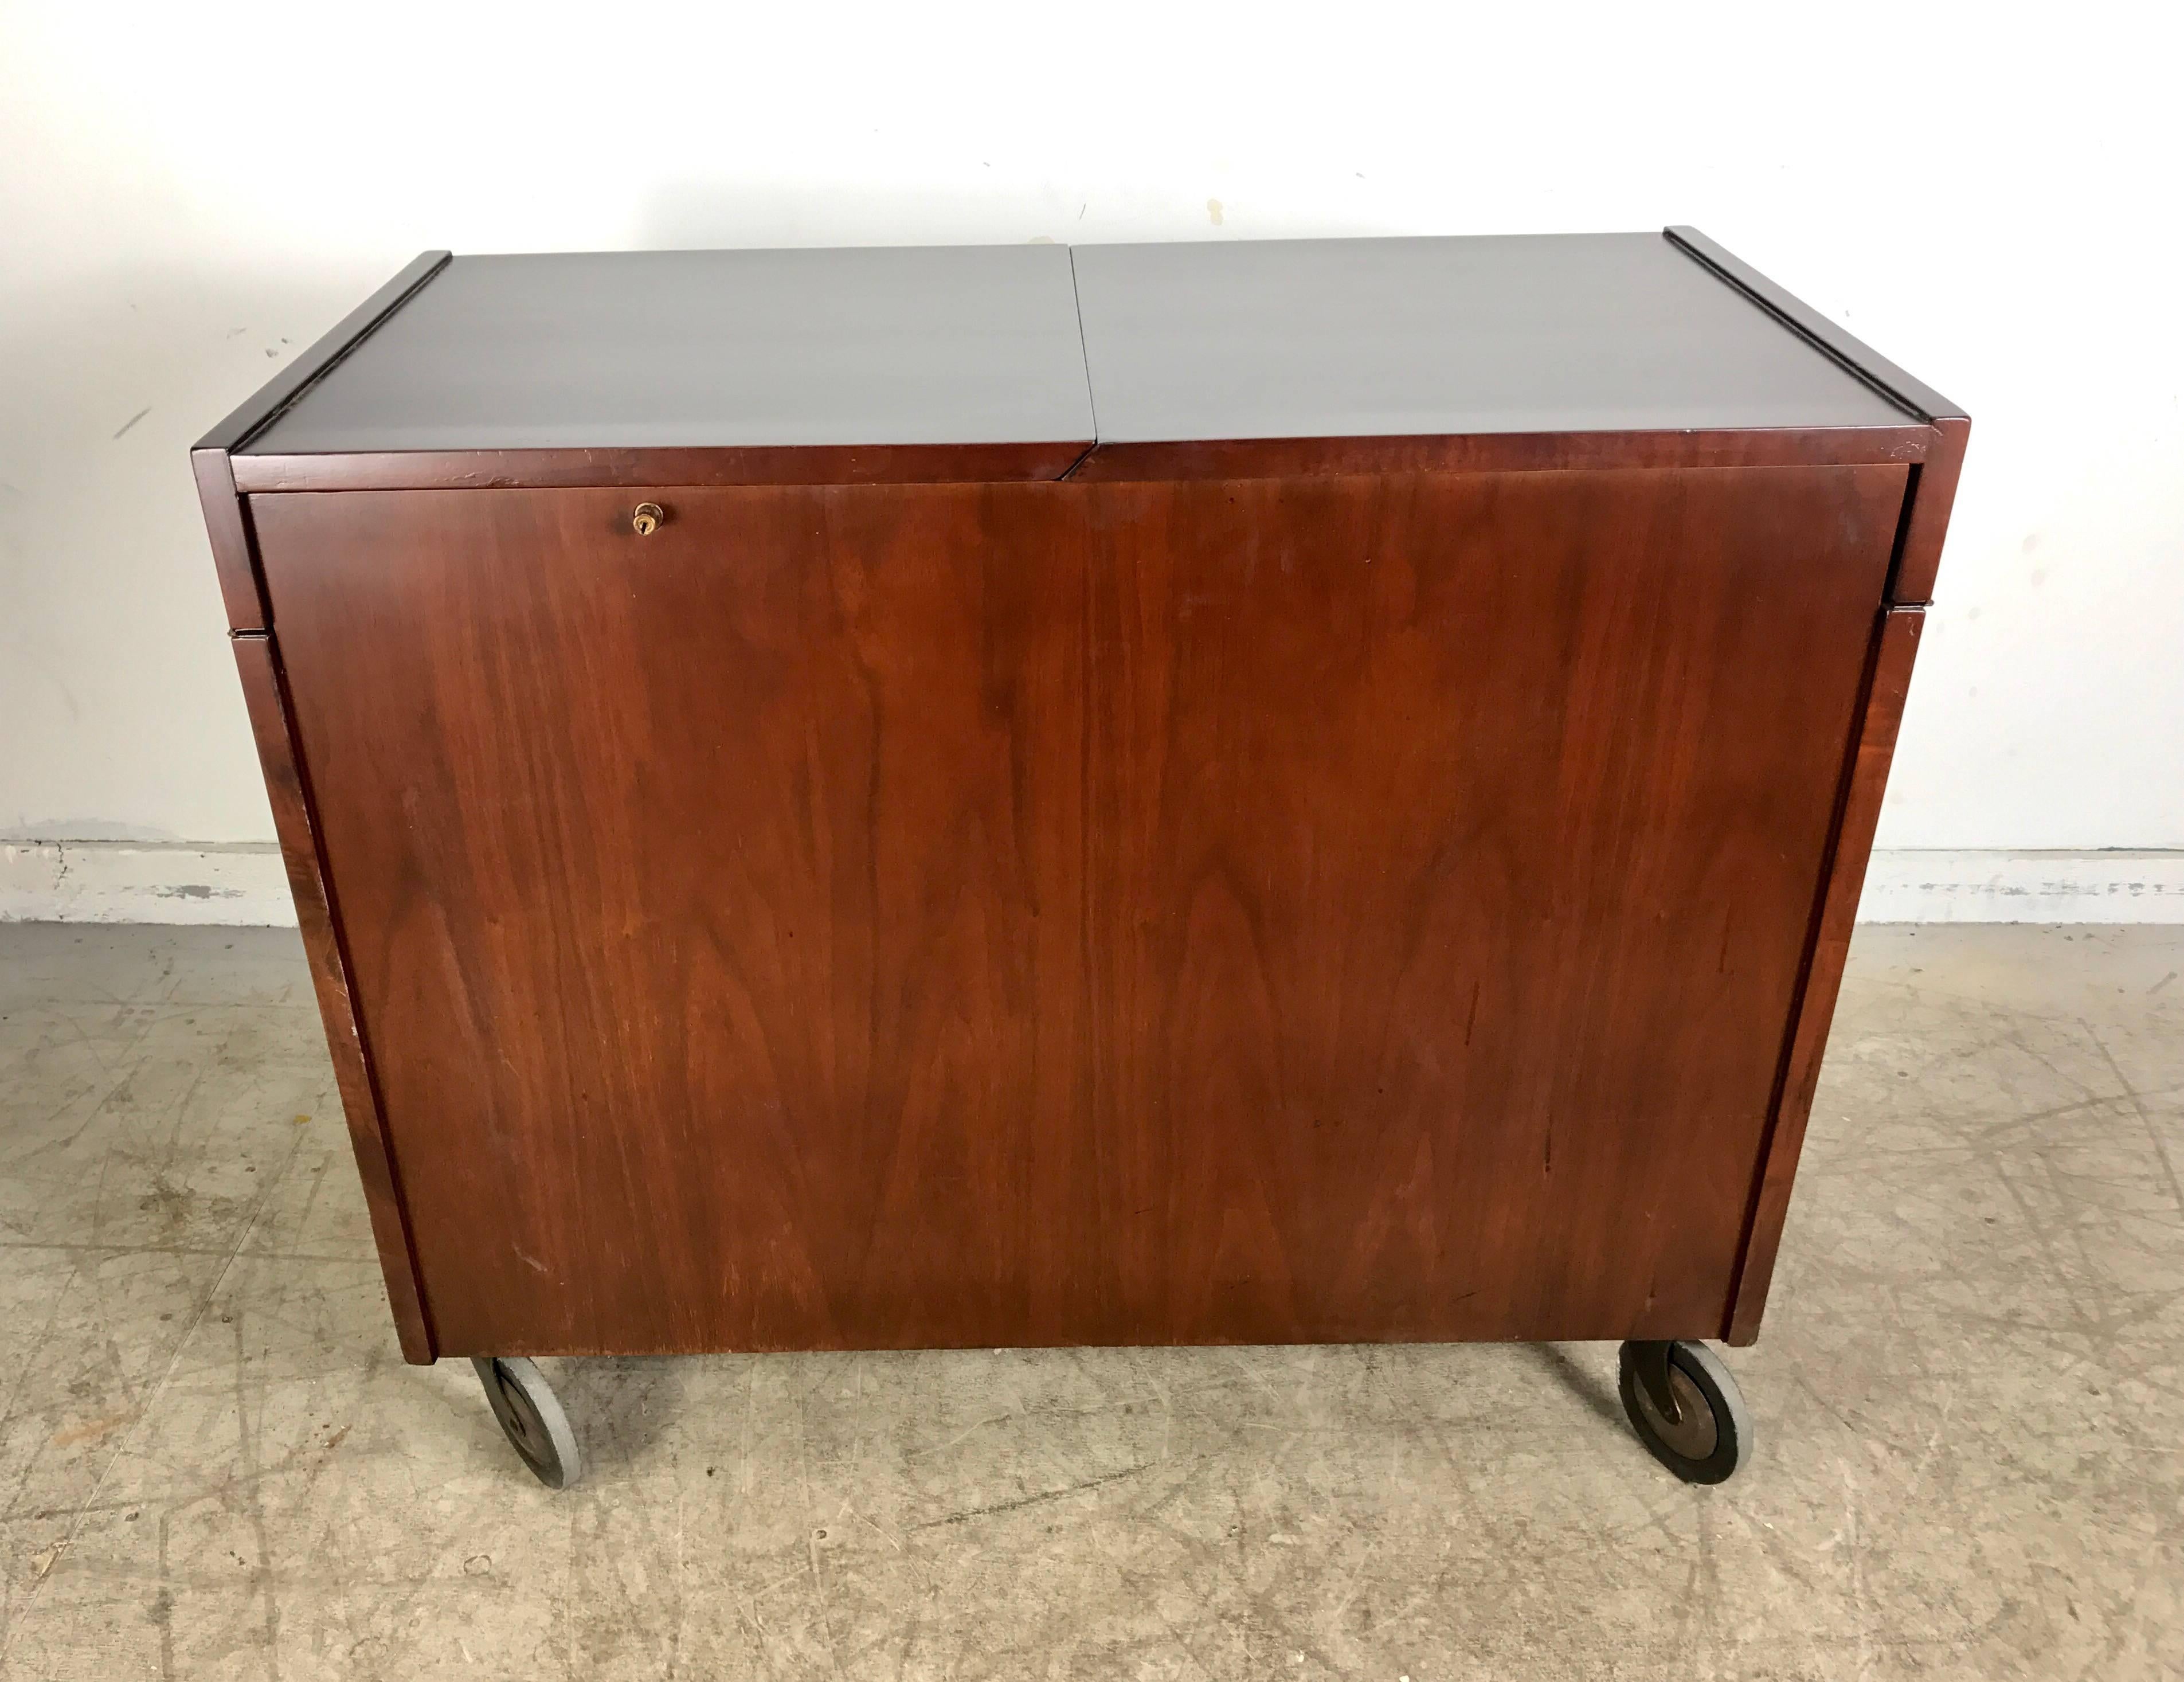 Classic Mid-Century Modern Portable Rolling Fold Out Bar Cart In Good Condition For Sale In Buffalo, NY